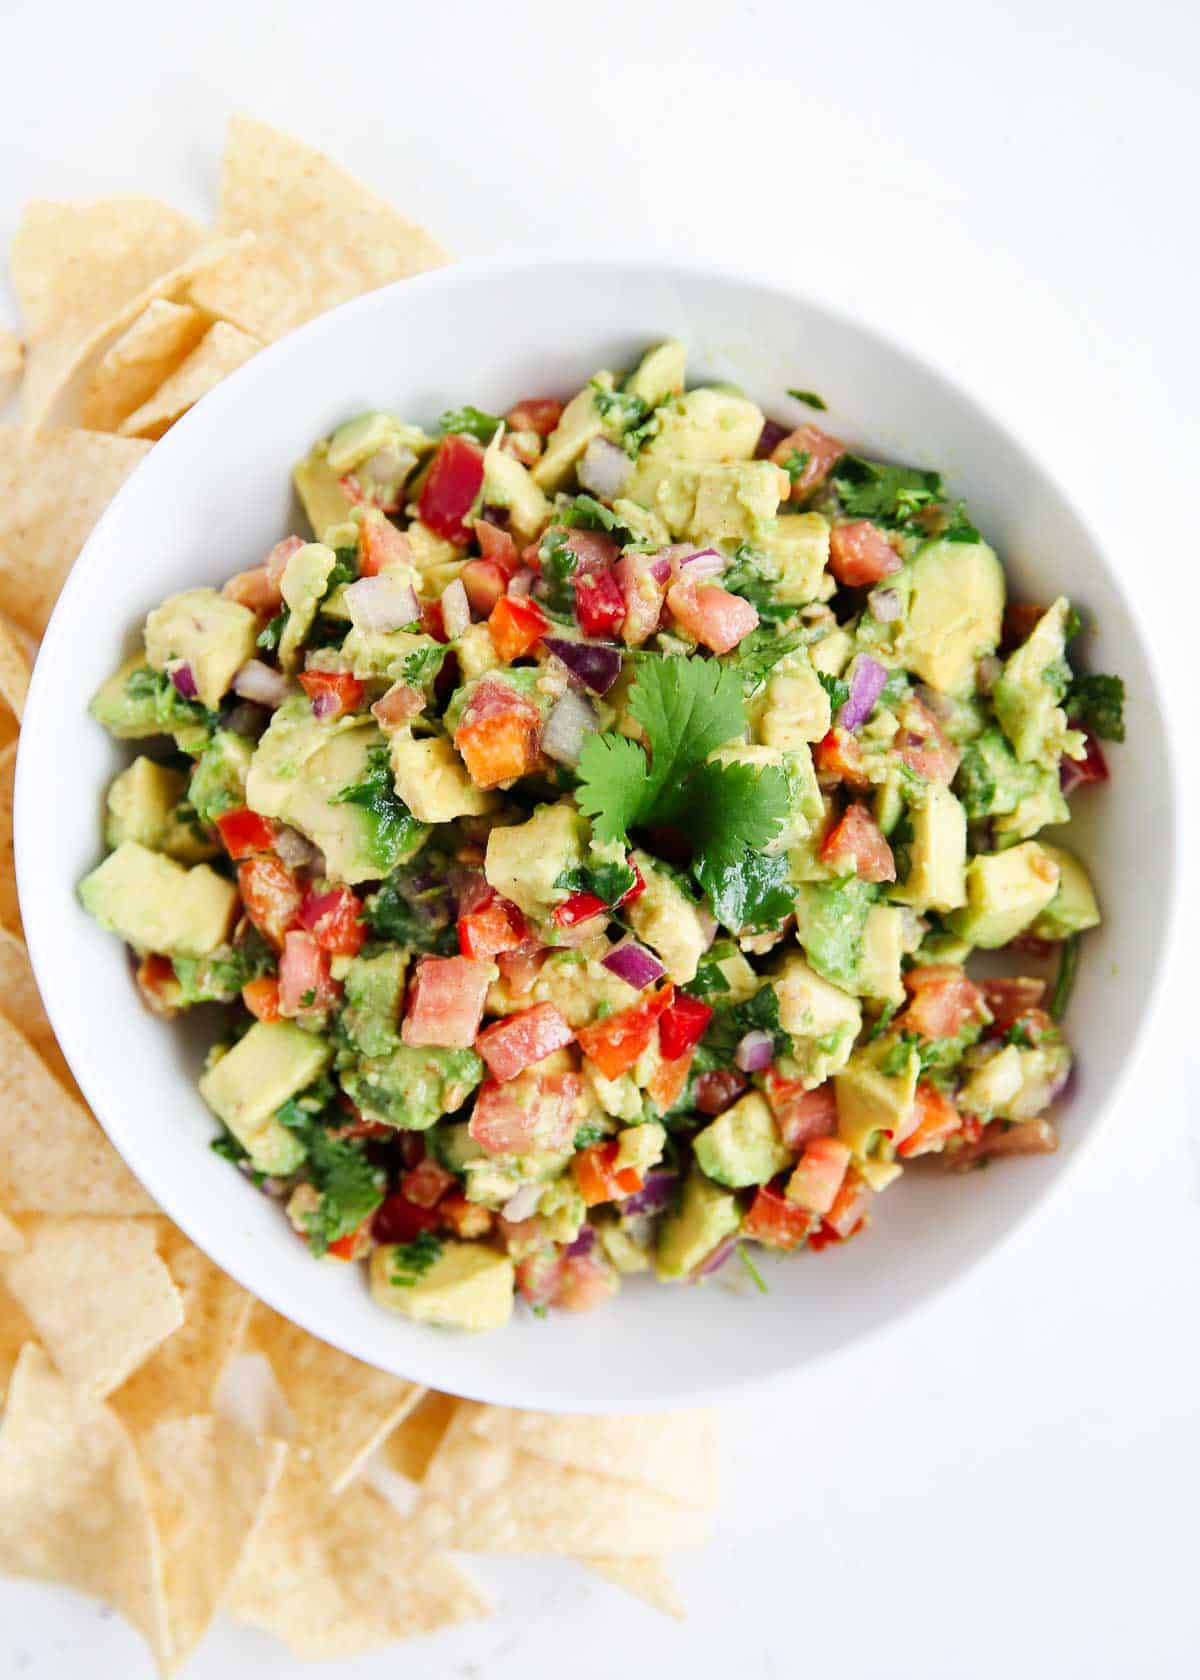 A white bowl with avocado salsa and chips on the side for scooping.